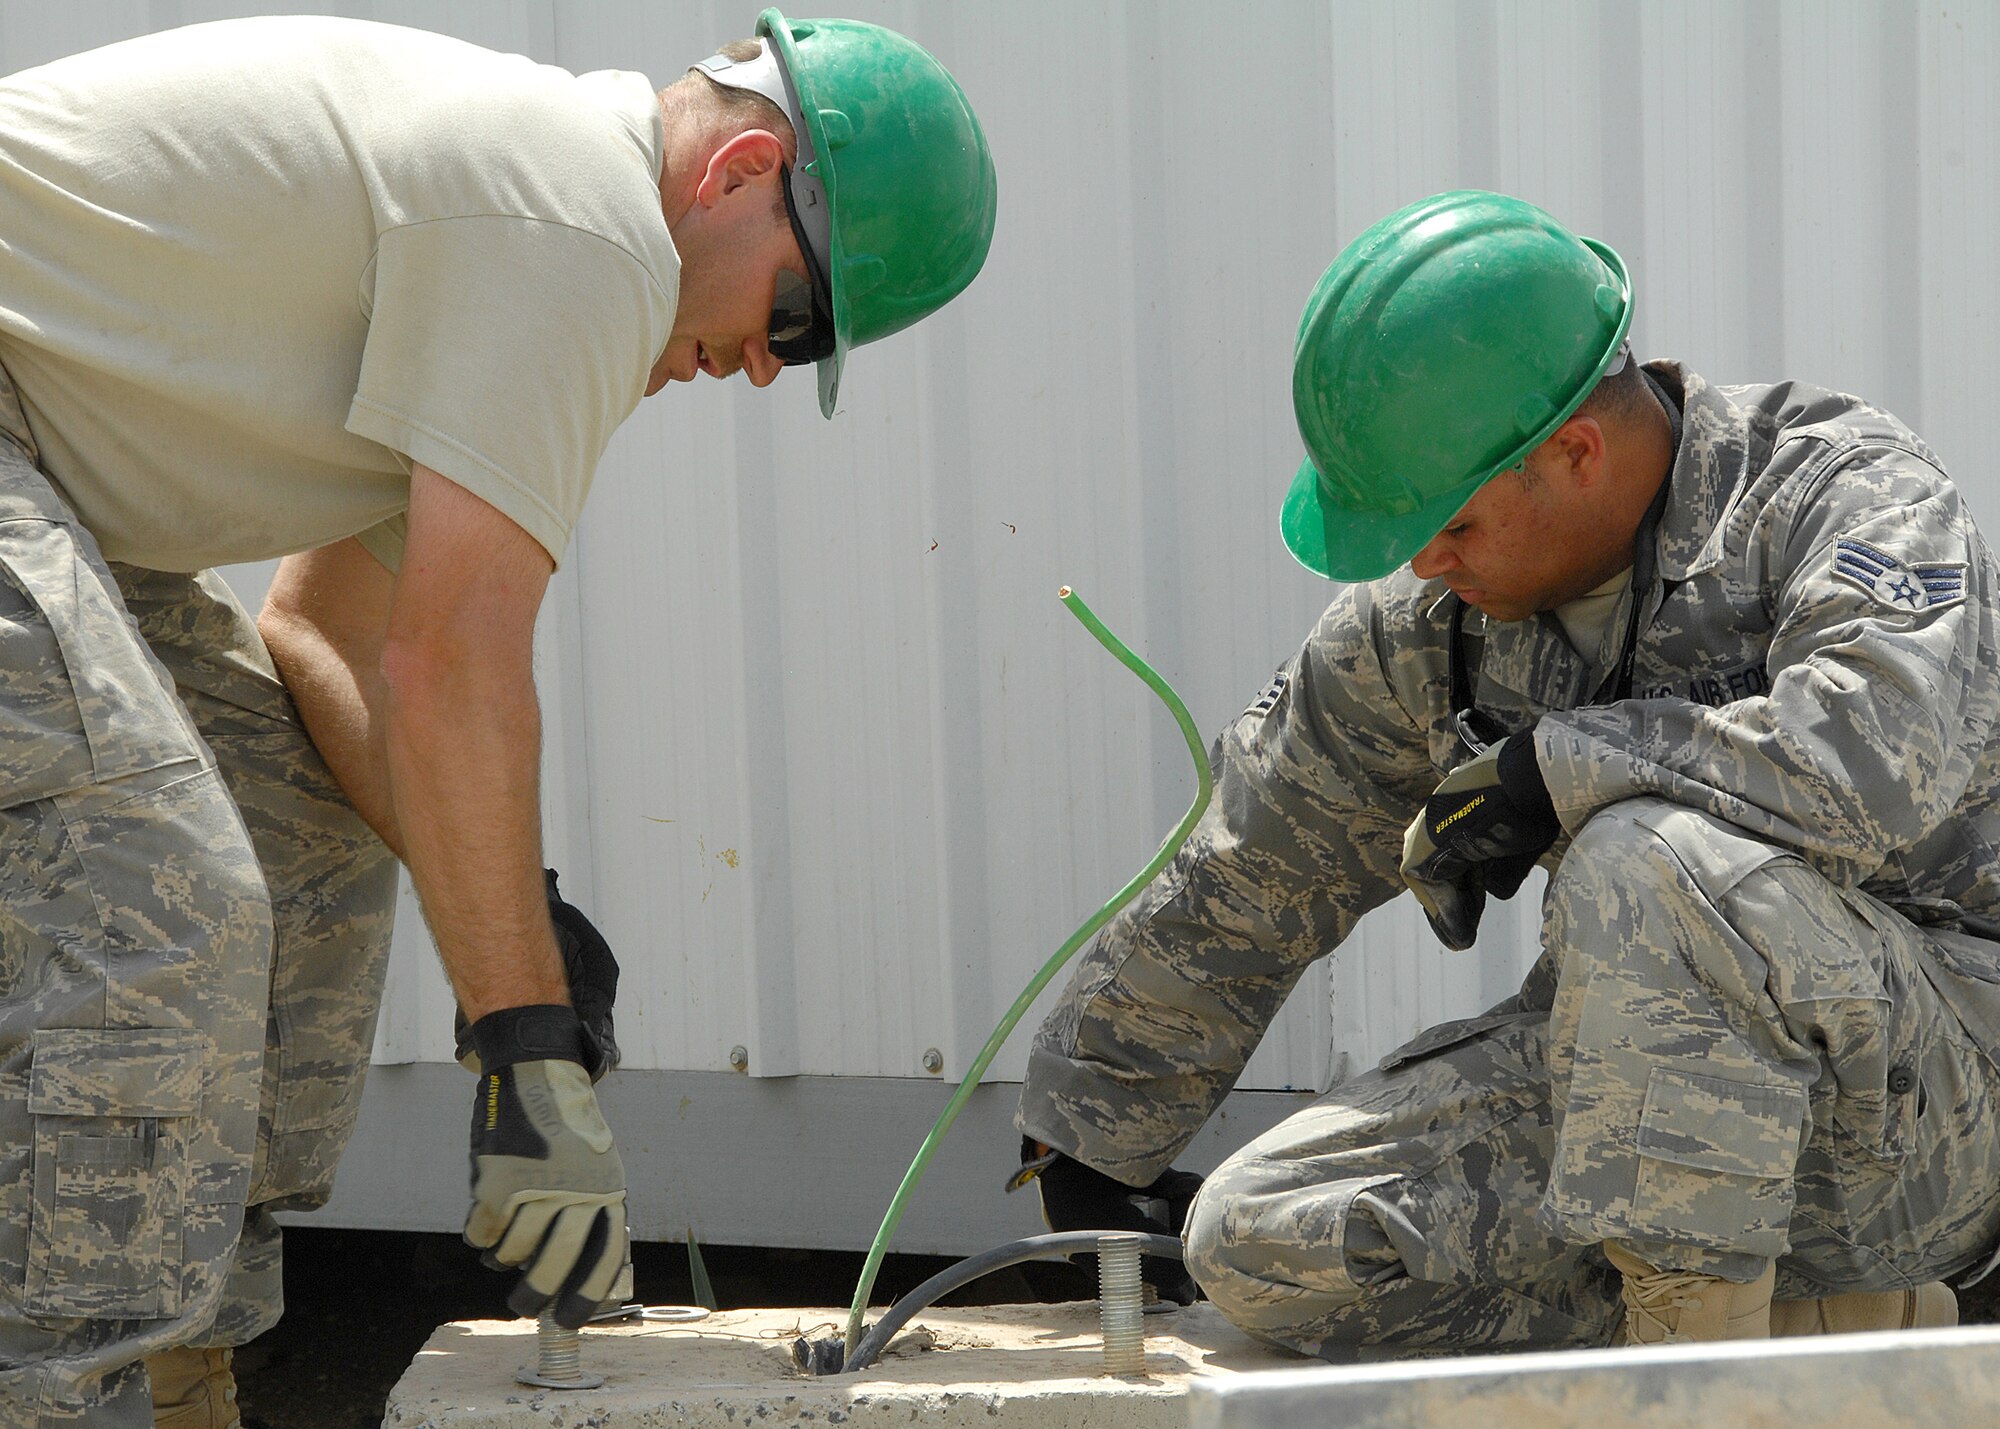 SOUTHWEST ASIA -- Staff Sgt. Ricky Clark and Senior Airman Jose Lozadacosme, both assigned to the 386th Expeditionary Civil Engineer Squadron, tighten down bolts on the base of a light pole on Aug. 23 at an air base in Southwest Asia. The 386th ECES installed four new light poles on the Republic of Korea Air Force compound because of previous wind damage to their poles. The installation was a joint effort between U.S. and Korean Airmen. Sergeant Clark is deployed from the New Jersey Air National Guard. Airman Lozadacosme is deployed from the Puerto Rico Air National Guard. (U.S. Air Force photo/Tech. Sgt. Raheem Moore)